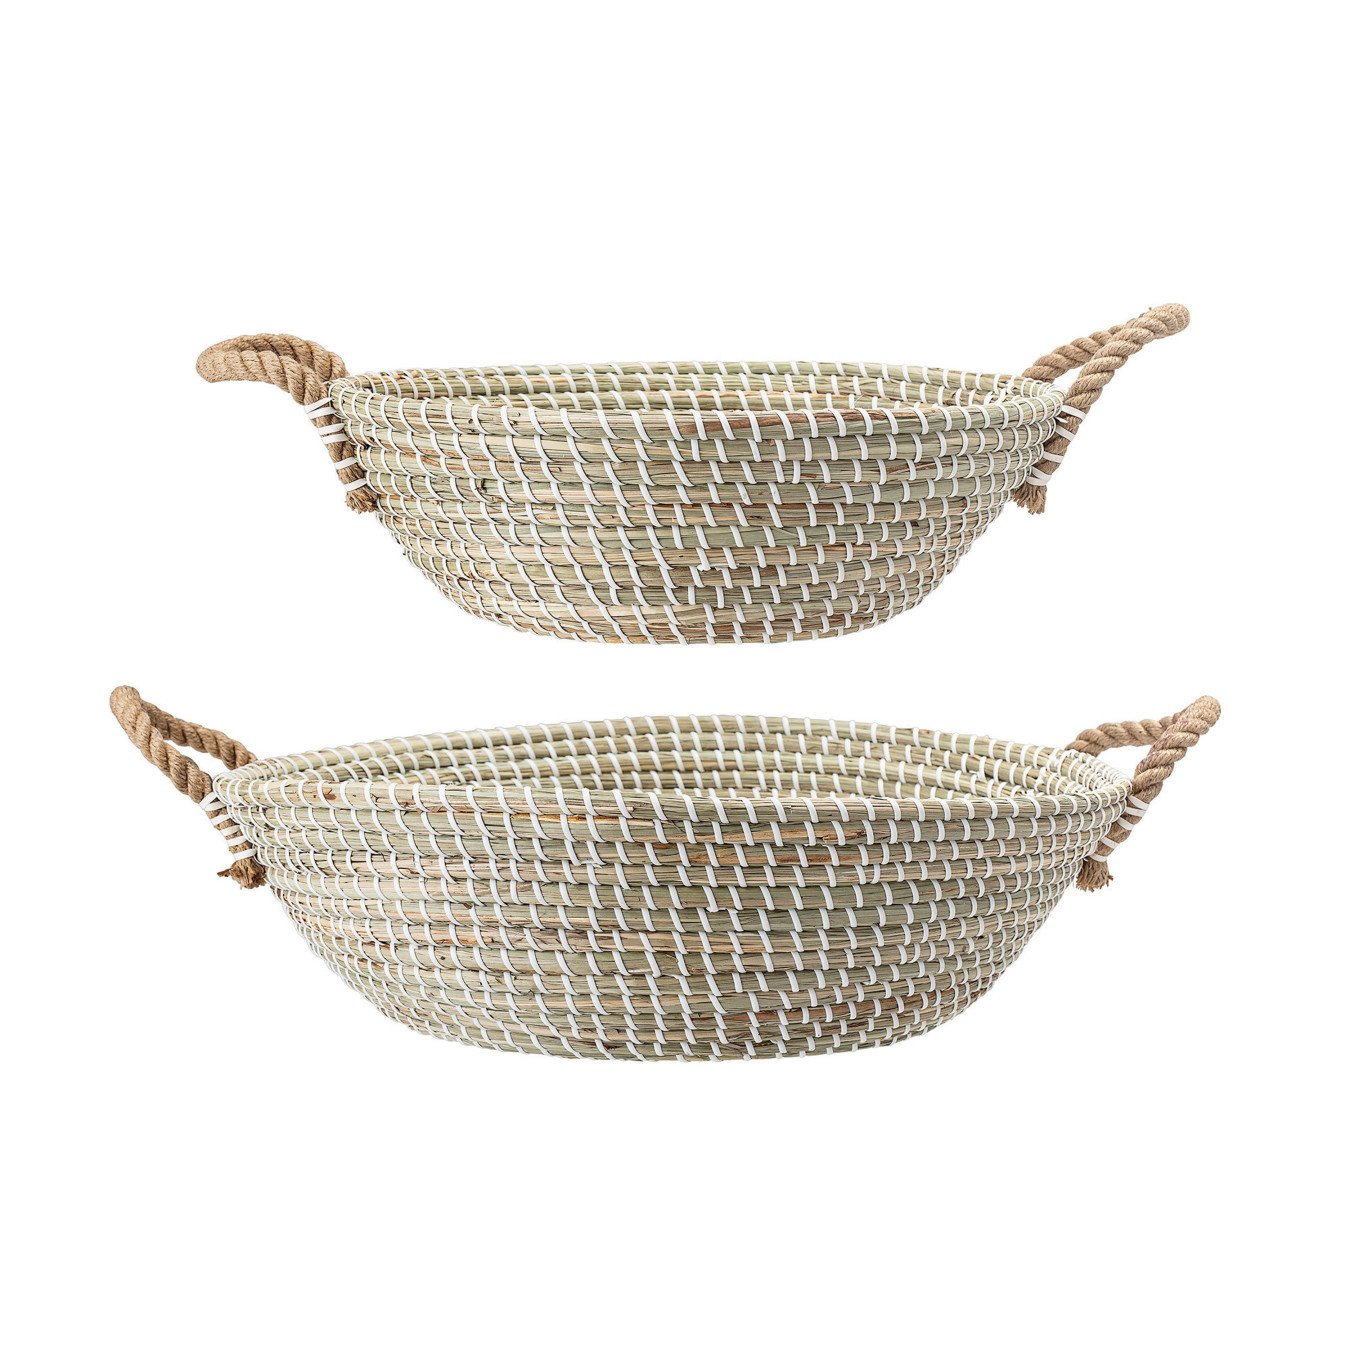 Handwoven White & Beige Seagrass Baskets with Rope Handles (Set of 2 Sizes)